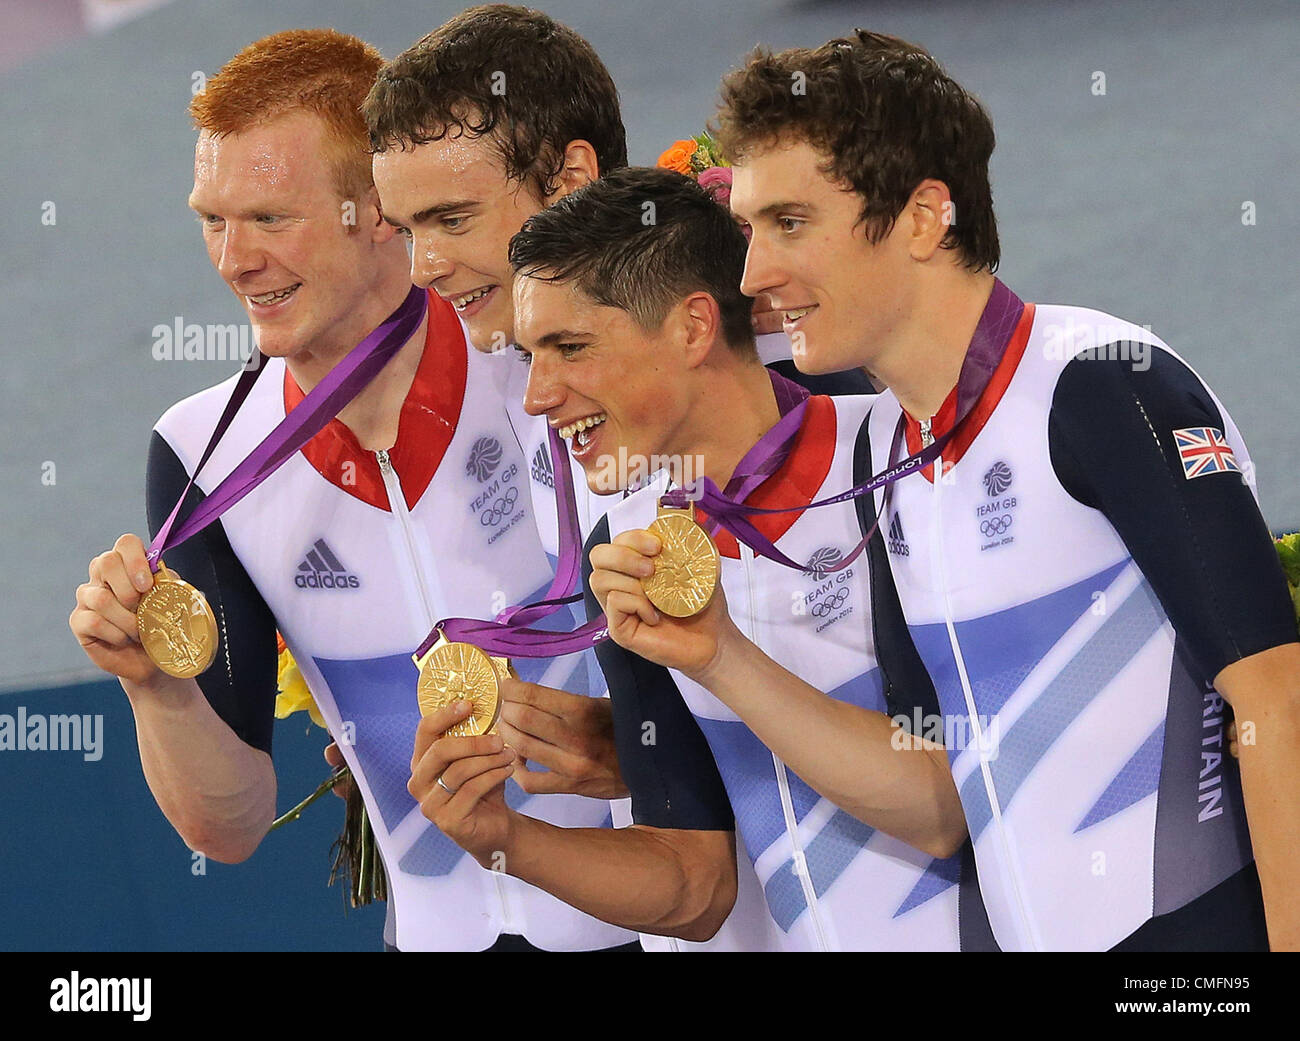 03.08.2012. London England. Great Britain's gold medalists Edward Clancy, Geraint Thomas, Steven Burke and Peter Kennaugh pose on the podium after winning the London 2012 Olympic Games men's team pursuit track cycling event at the Veldorome during the London 2012 Olympic Games, London, Great Britain, 03 August 2012. Stock Photo